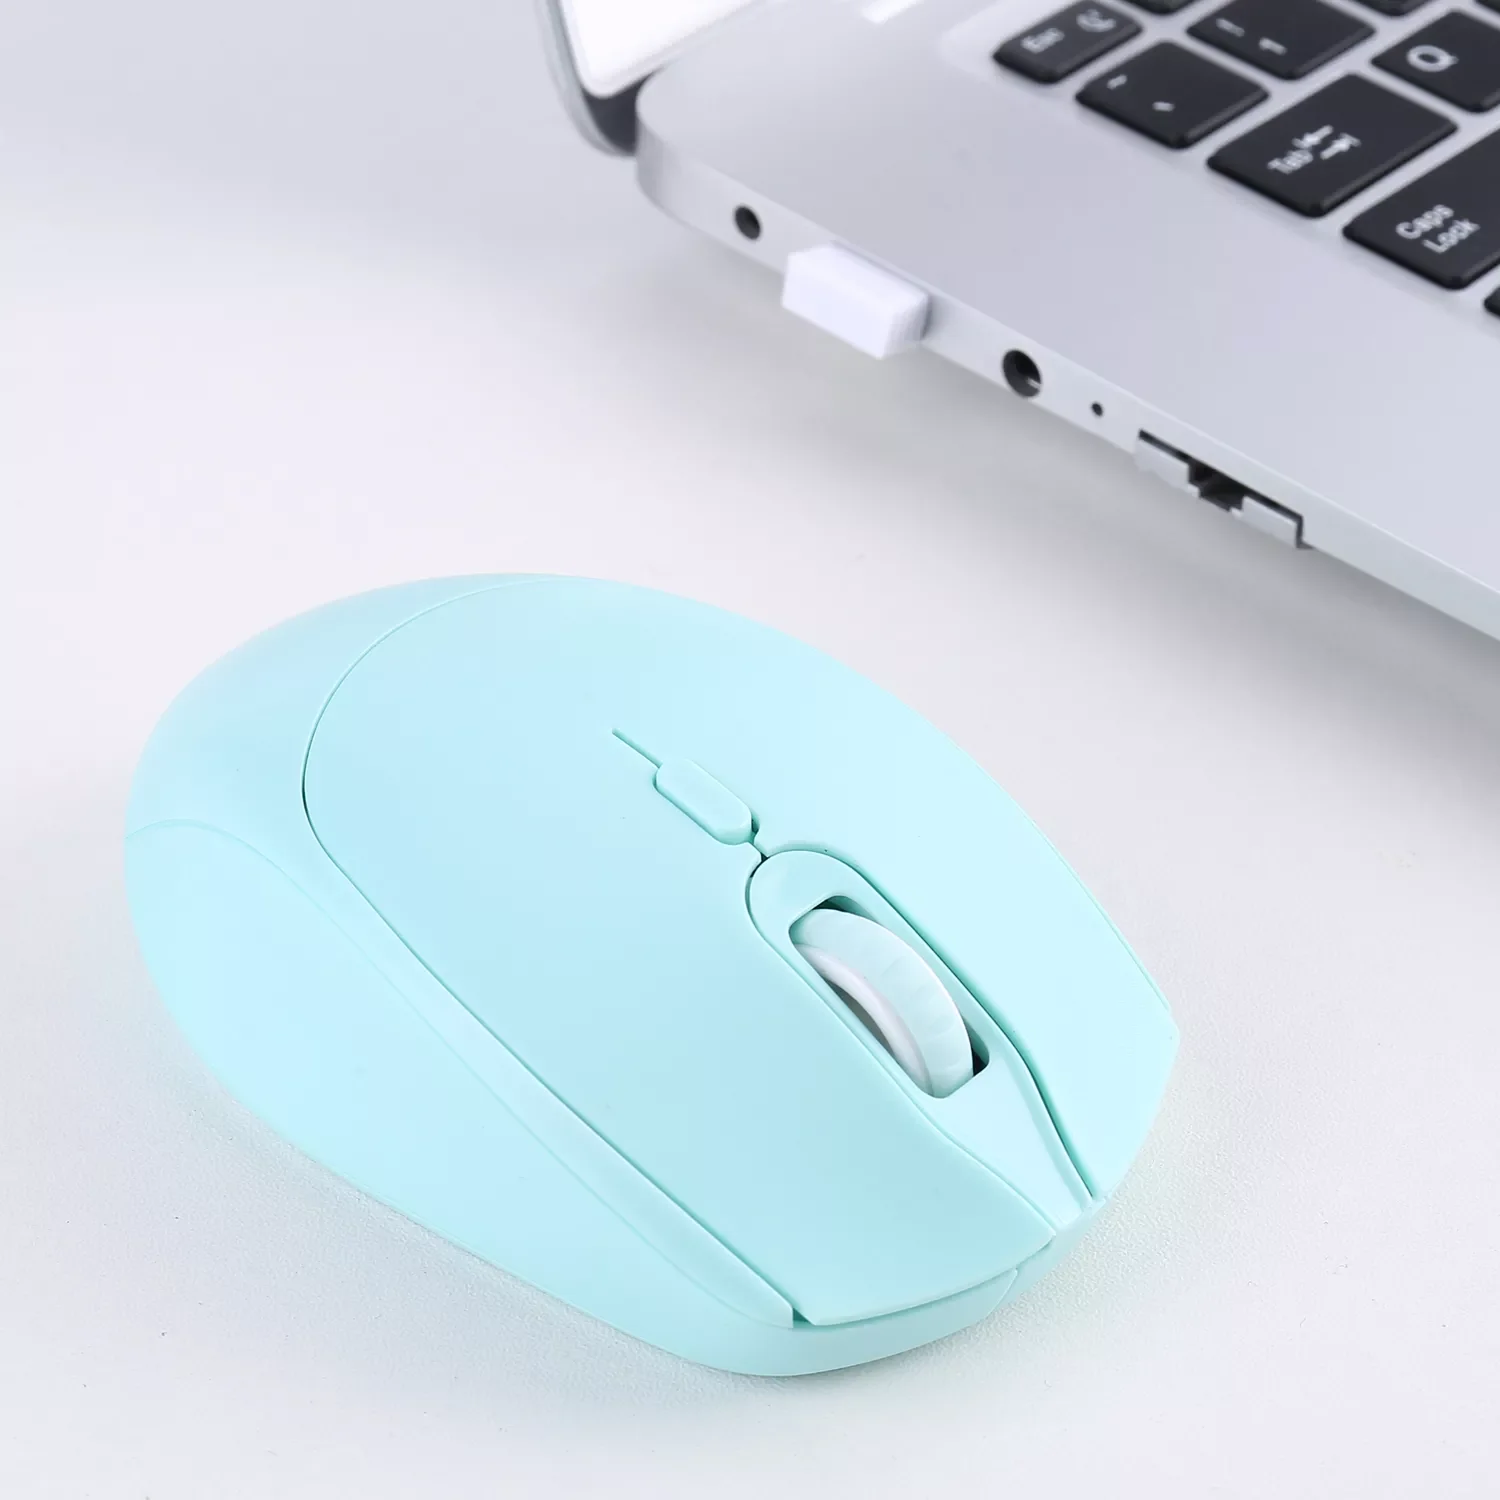 Mouse 2.4G Noiseless Mouse with USB Receiver Portable for Windows 2000/ME/XP/vista/7/8/10/mac